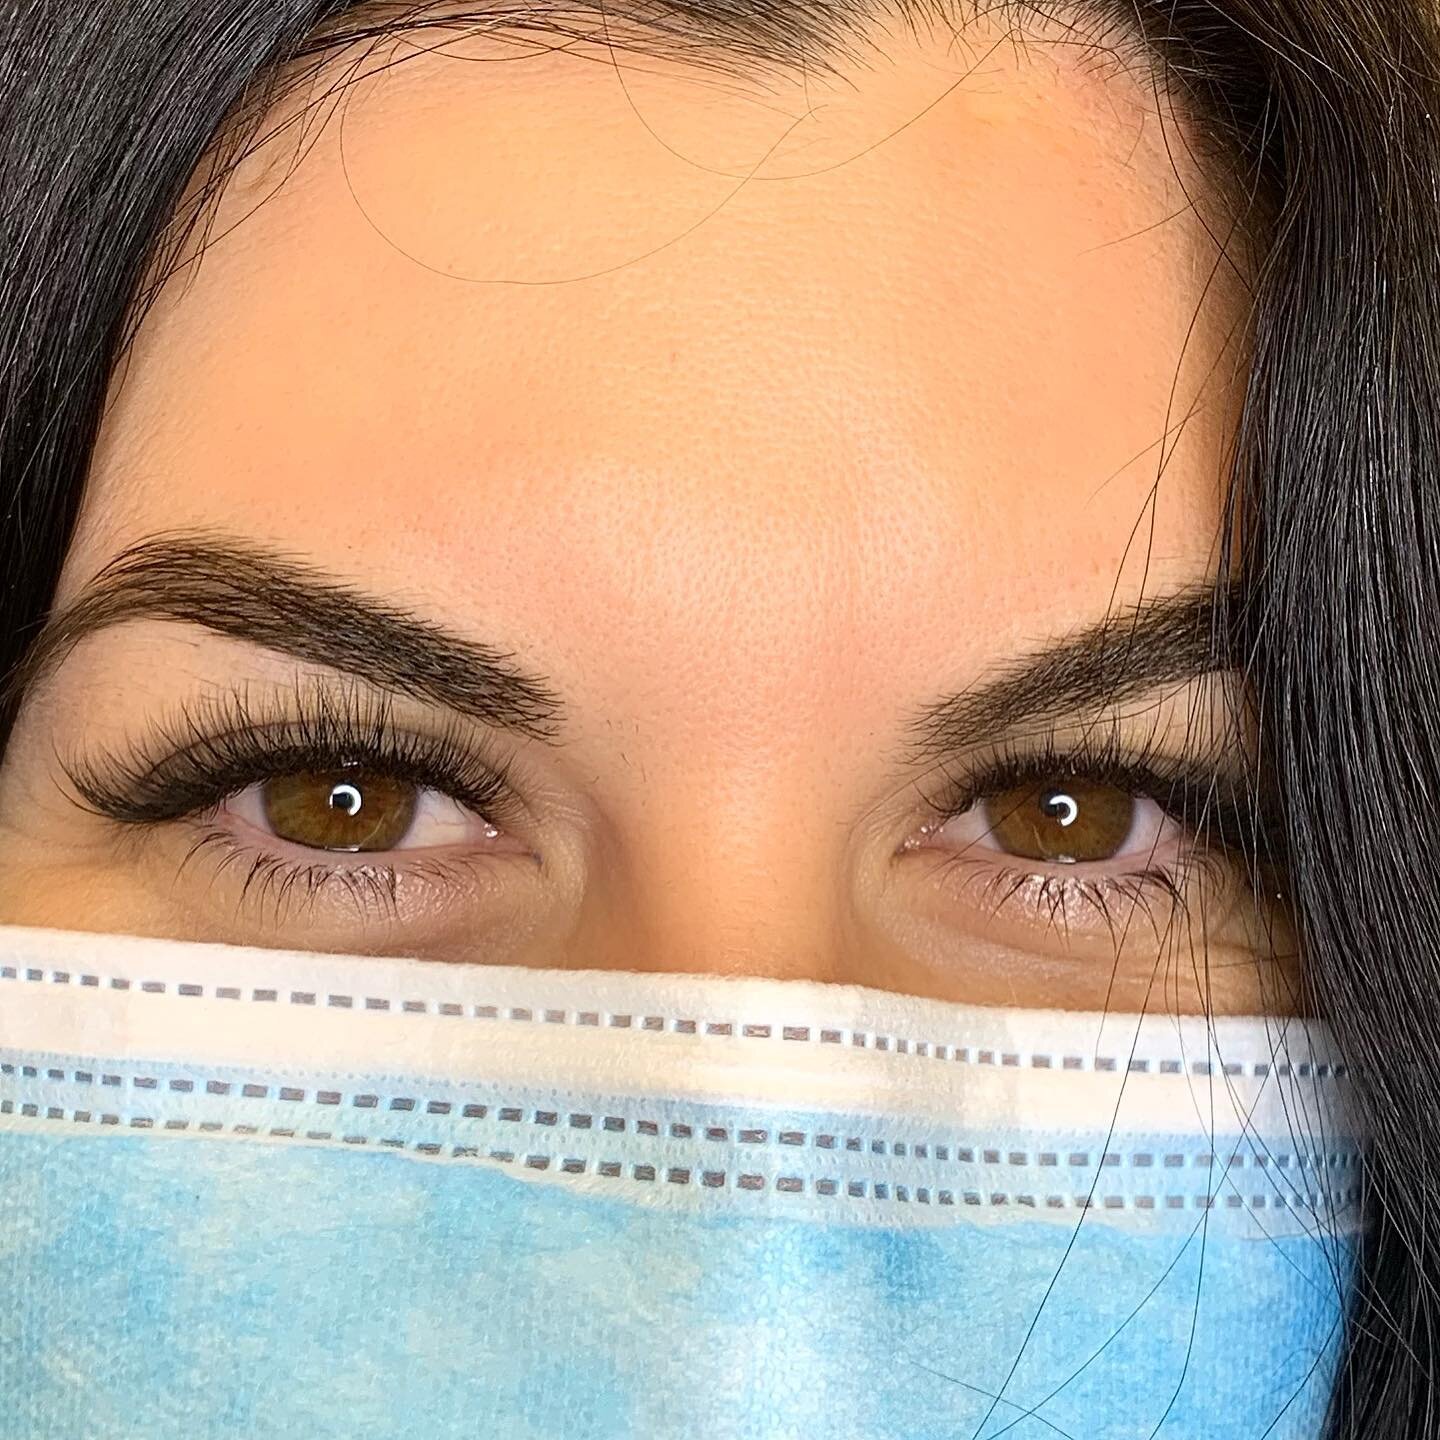 Lashing these sultry eyes was the highlight of my day. She is such a beauty, inside and out✨ #lashlove #hybridlashes #lashartist #lashextensions